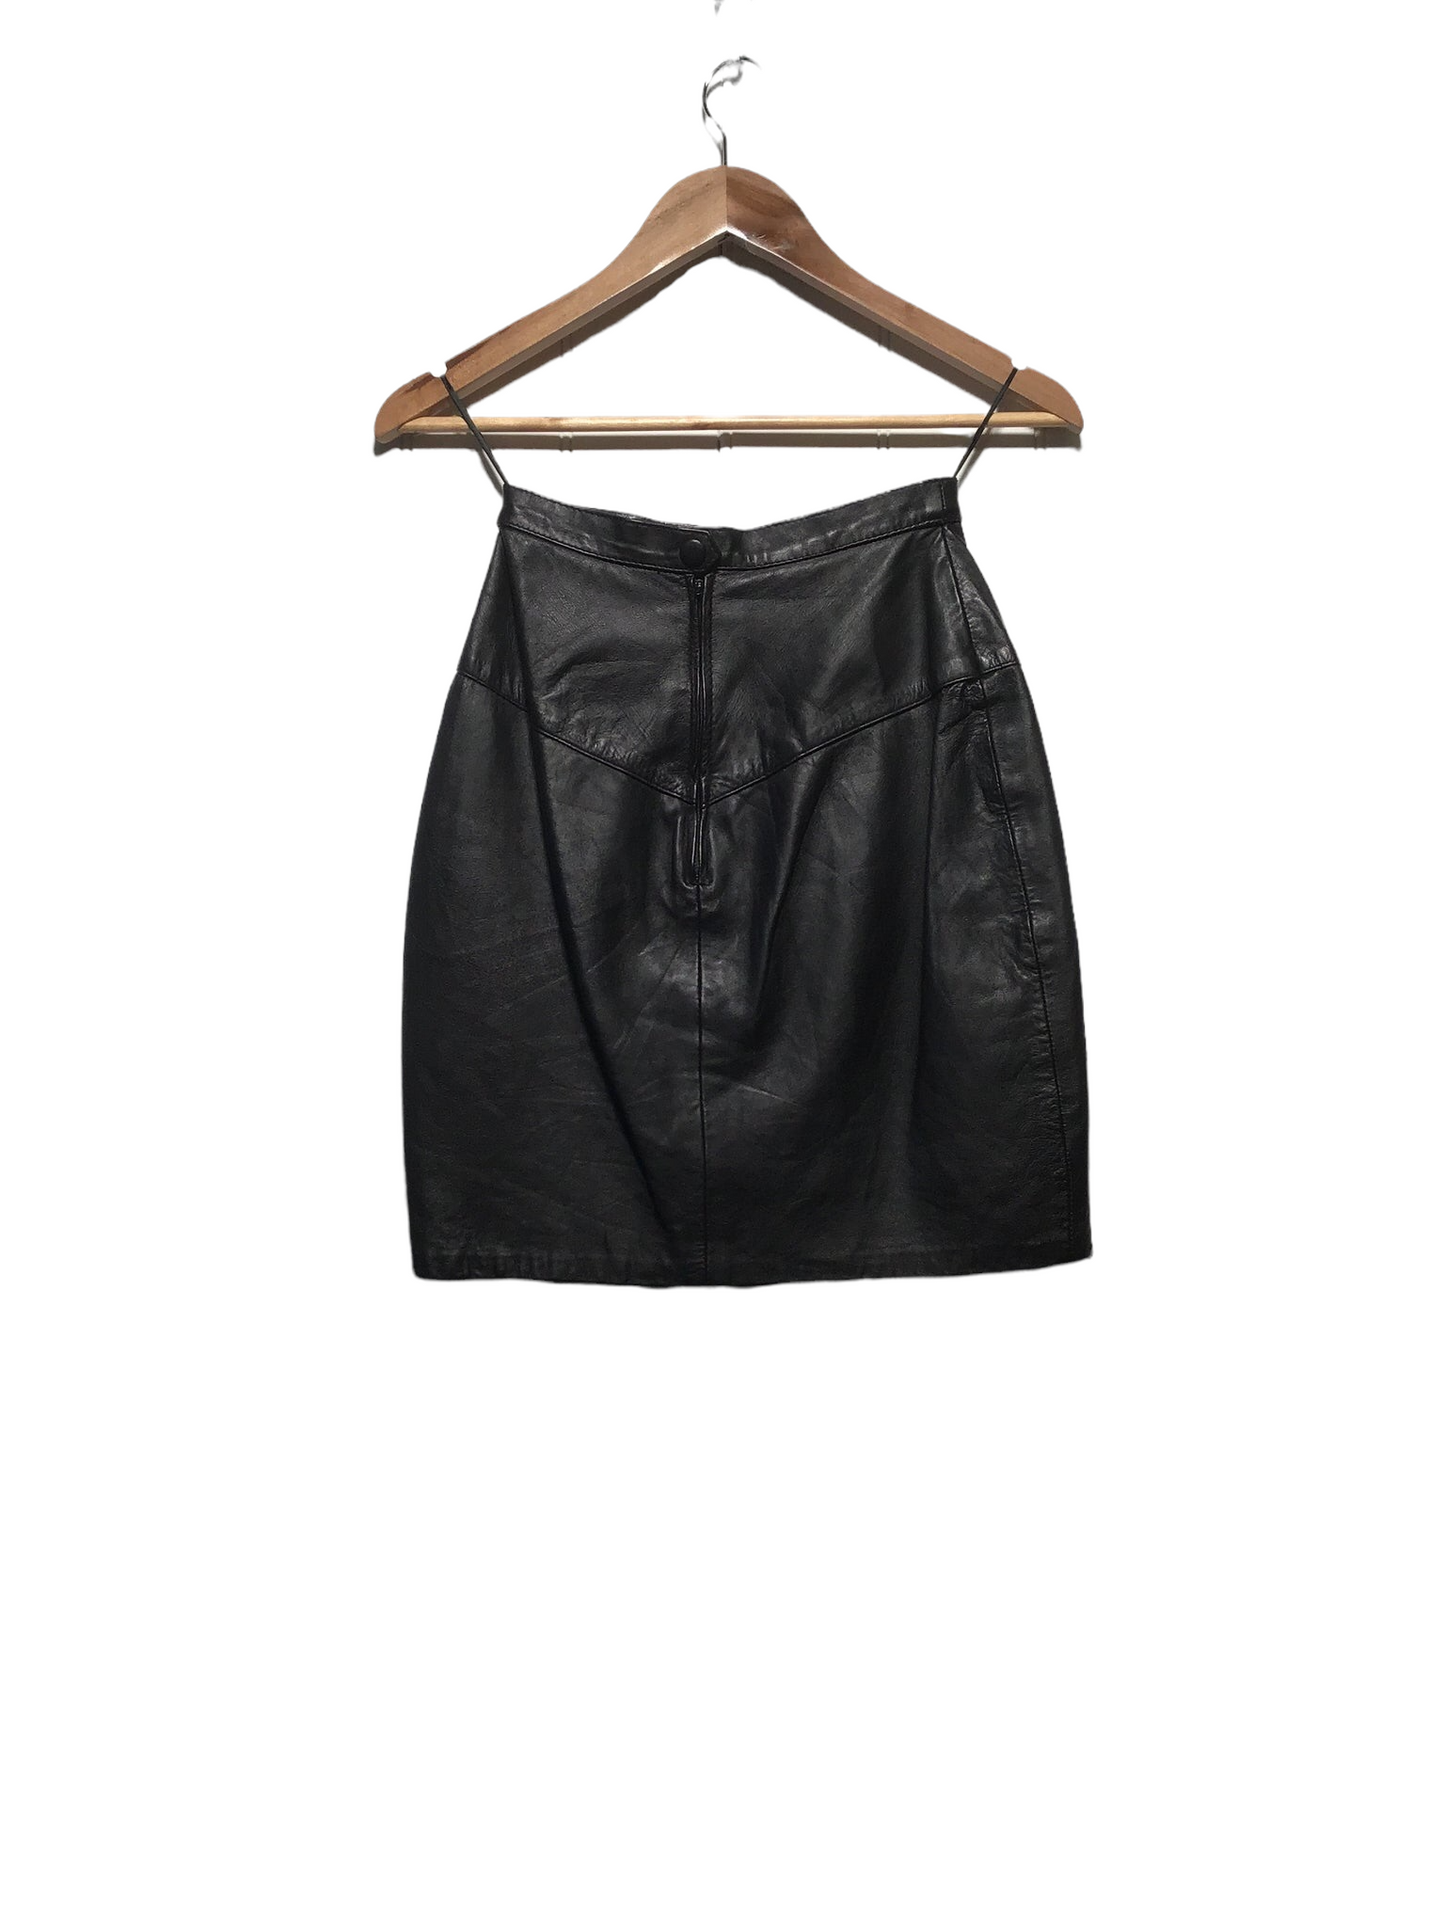 Short Leather Skirt (Size XS)